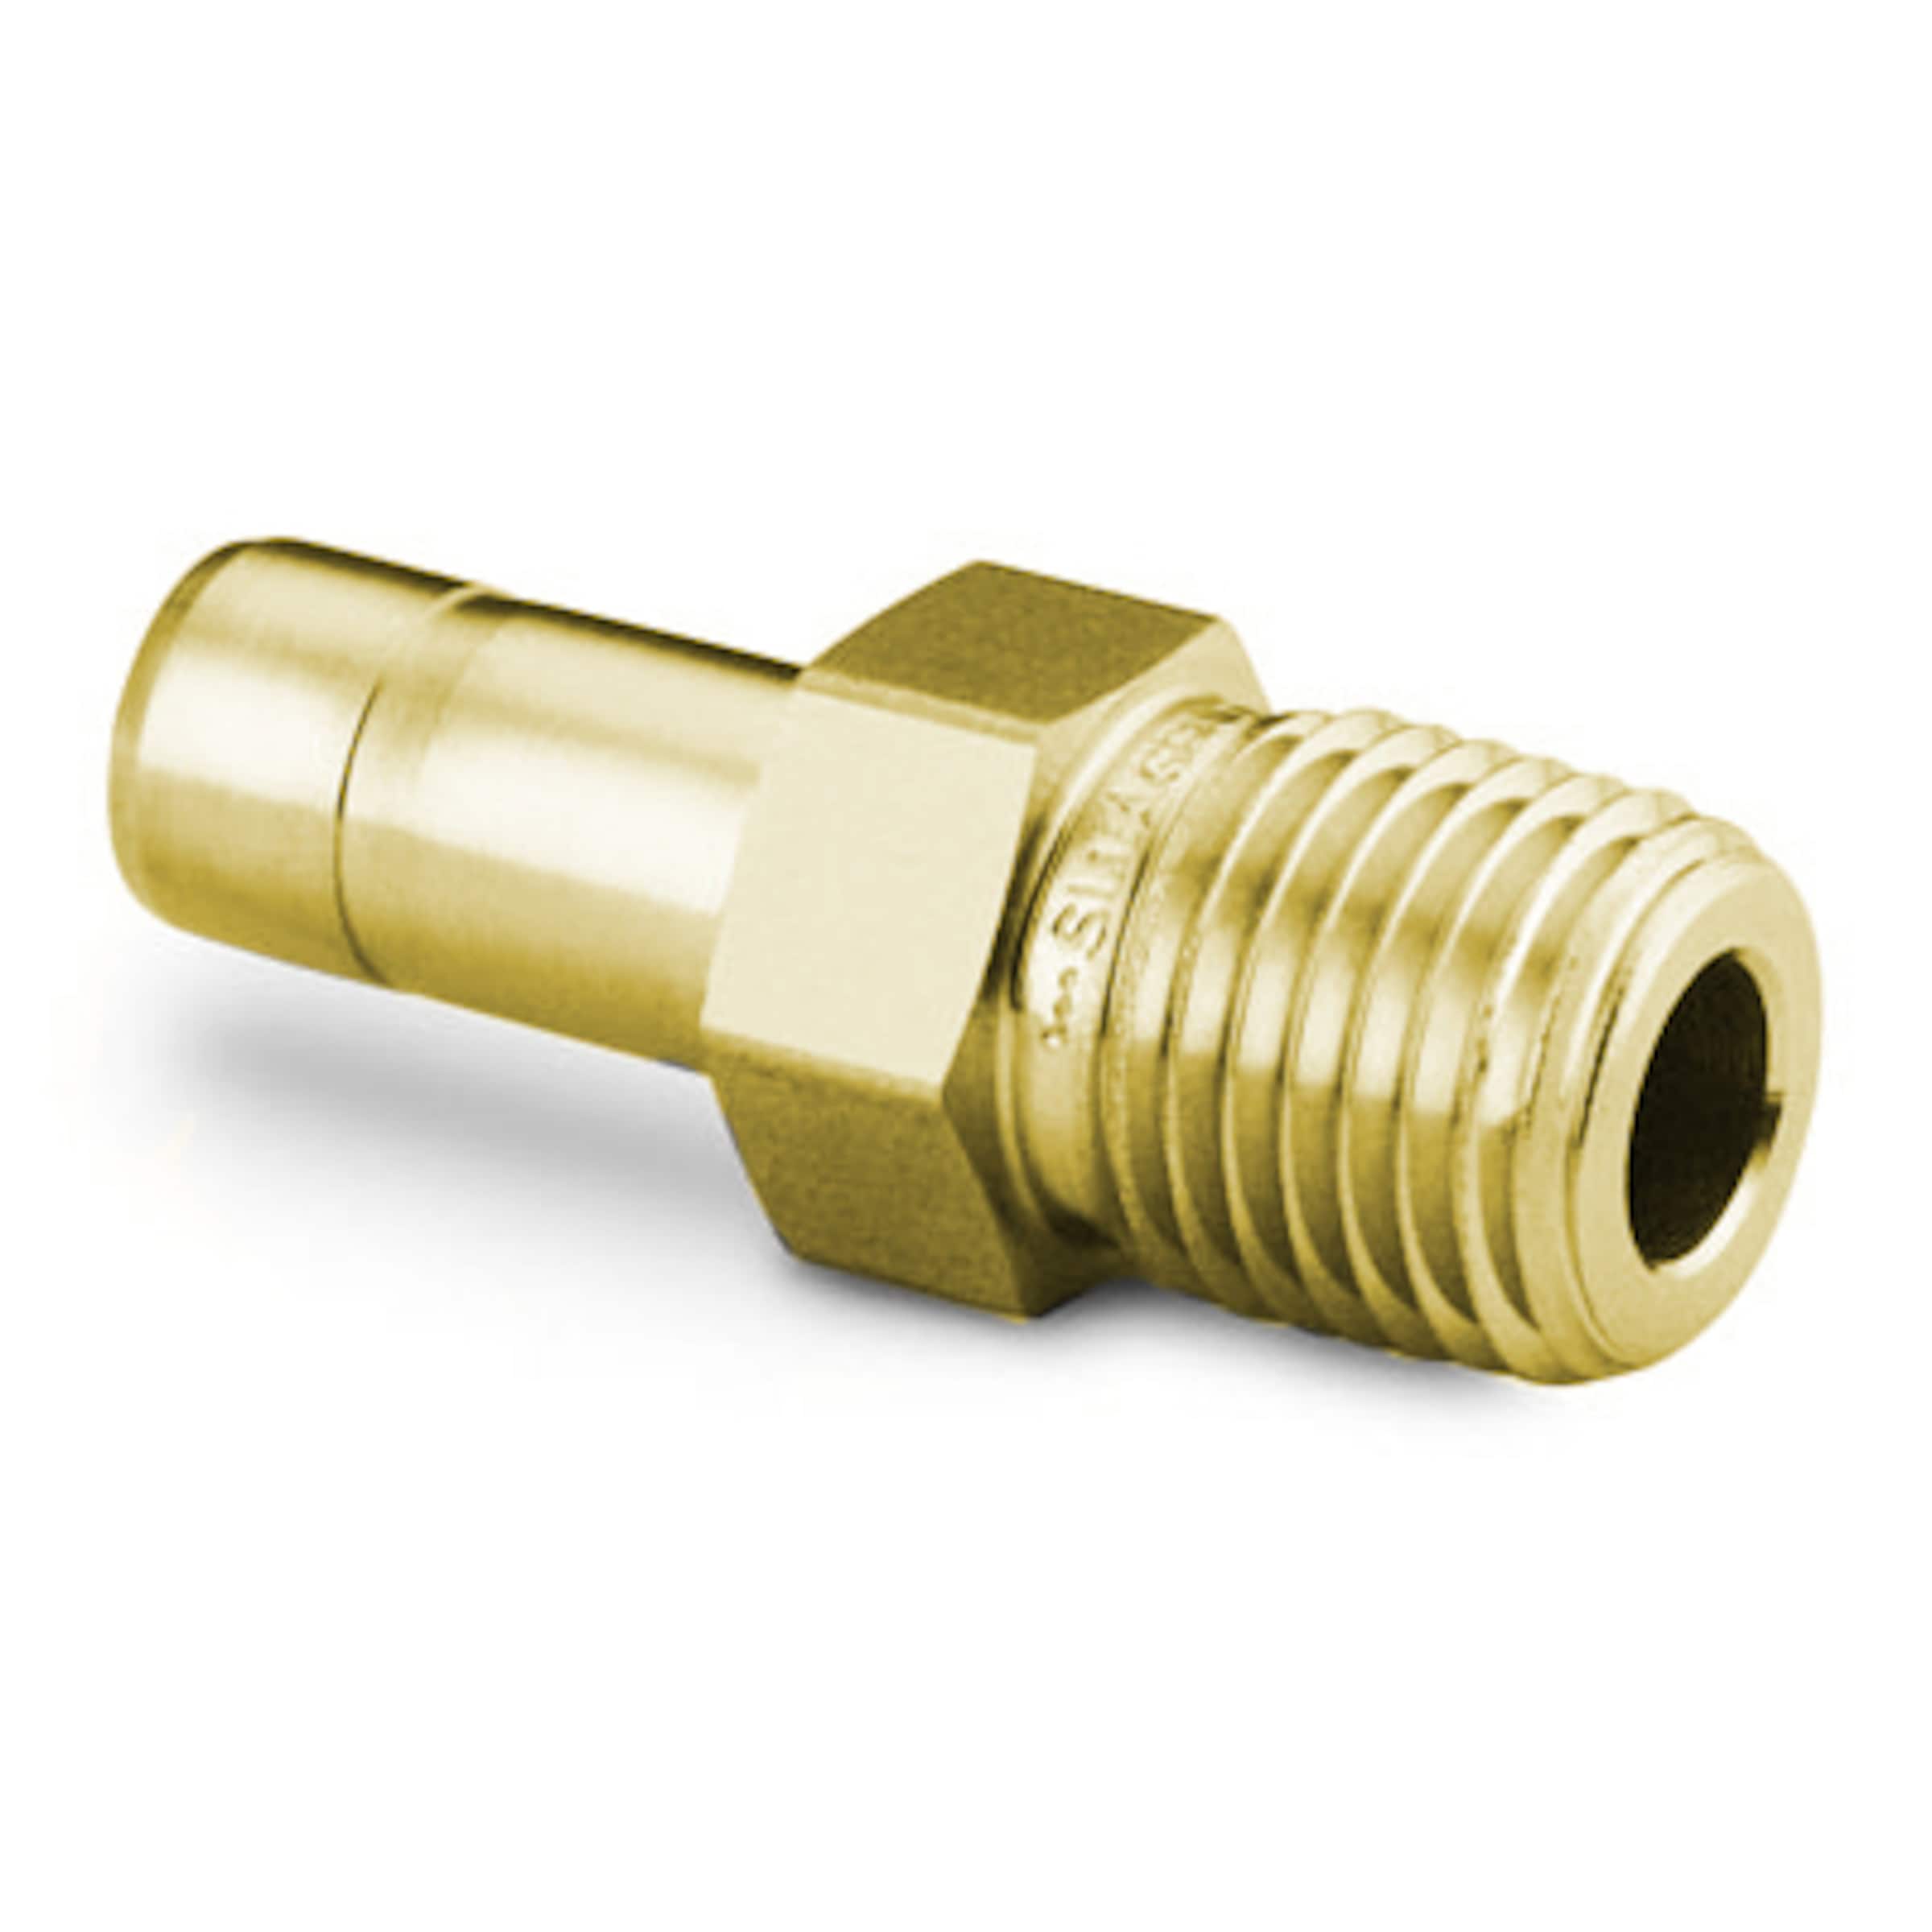 Brass Compression Tube Pipe Fitting Connector, Straight Coupling Adapter,  3/8 Tube OD x 3/8 NPT Male Connector 5pcs (3/8 OD Compression x 3/8 NPT